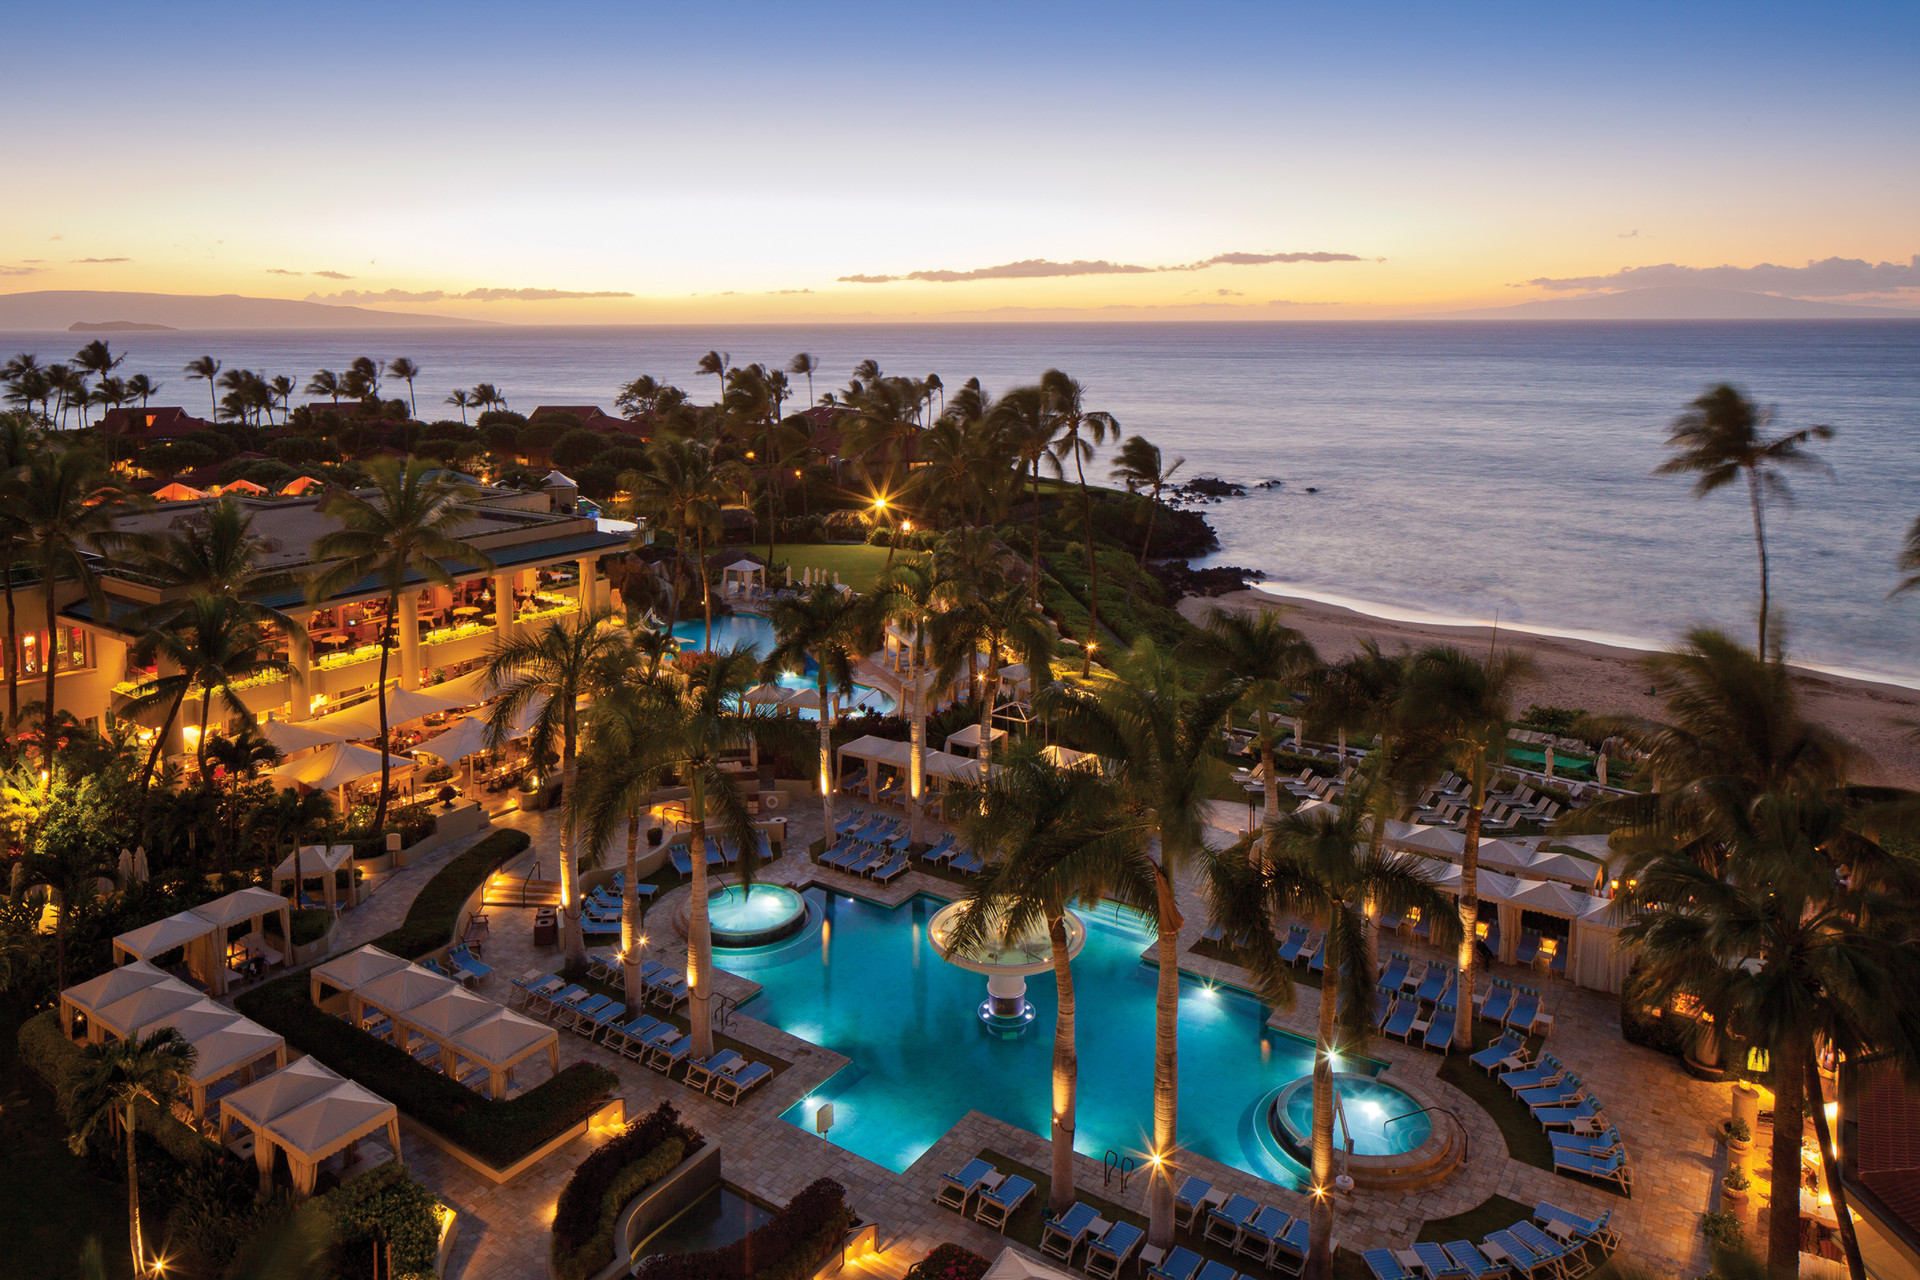 Four Seasons Resort Maui pampers guests with luxurious accommodations and amenities.